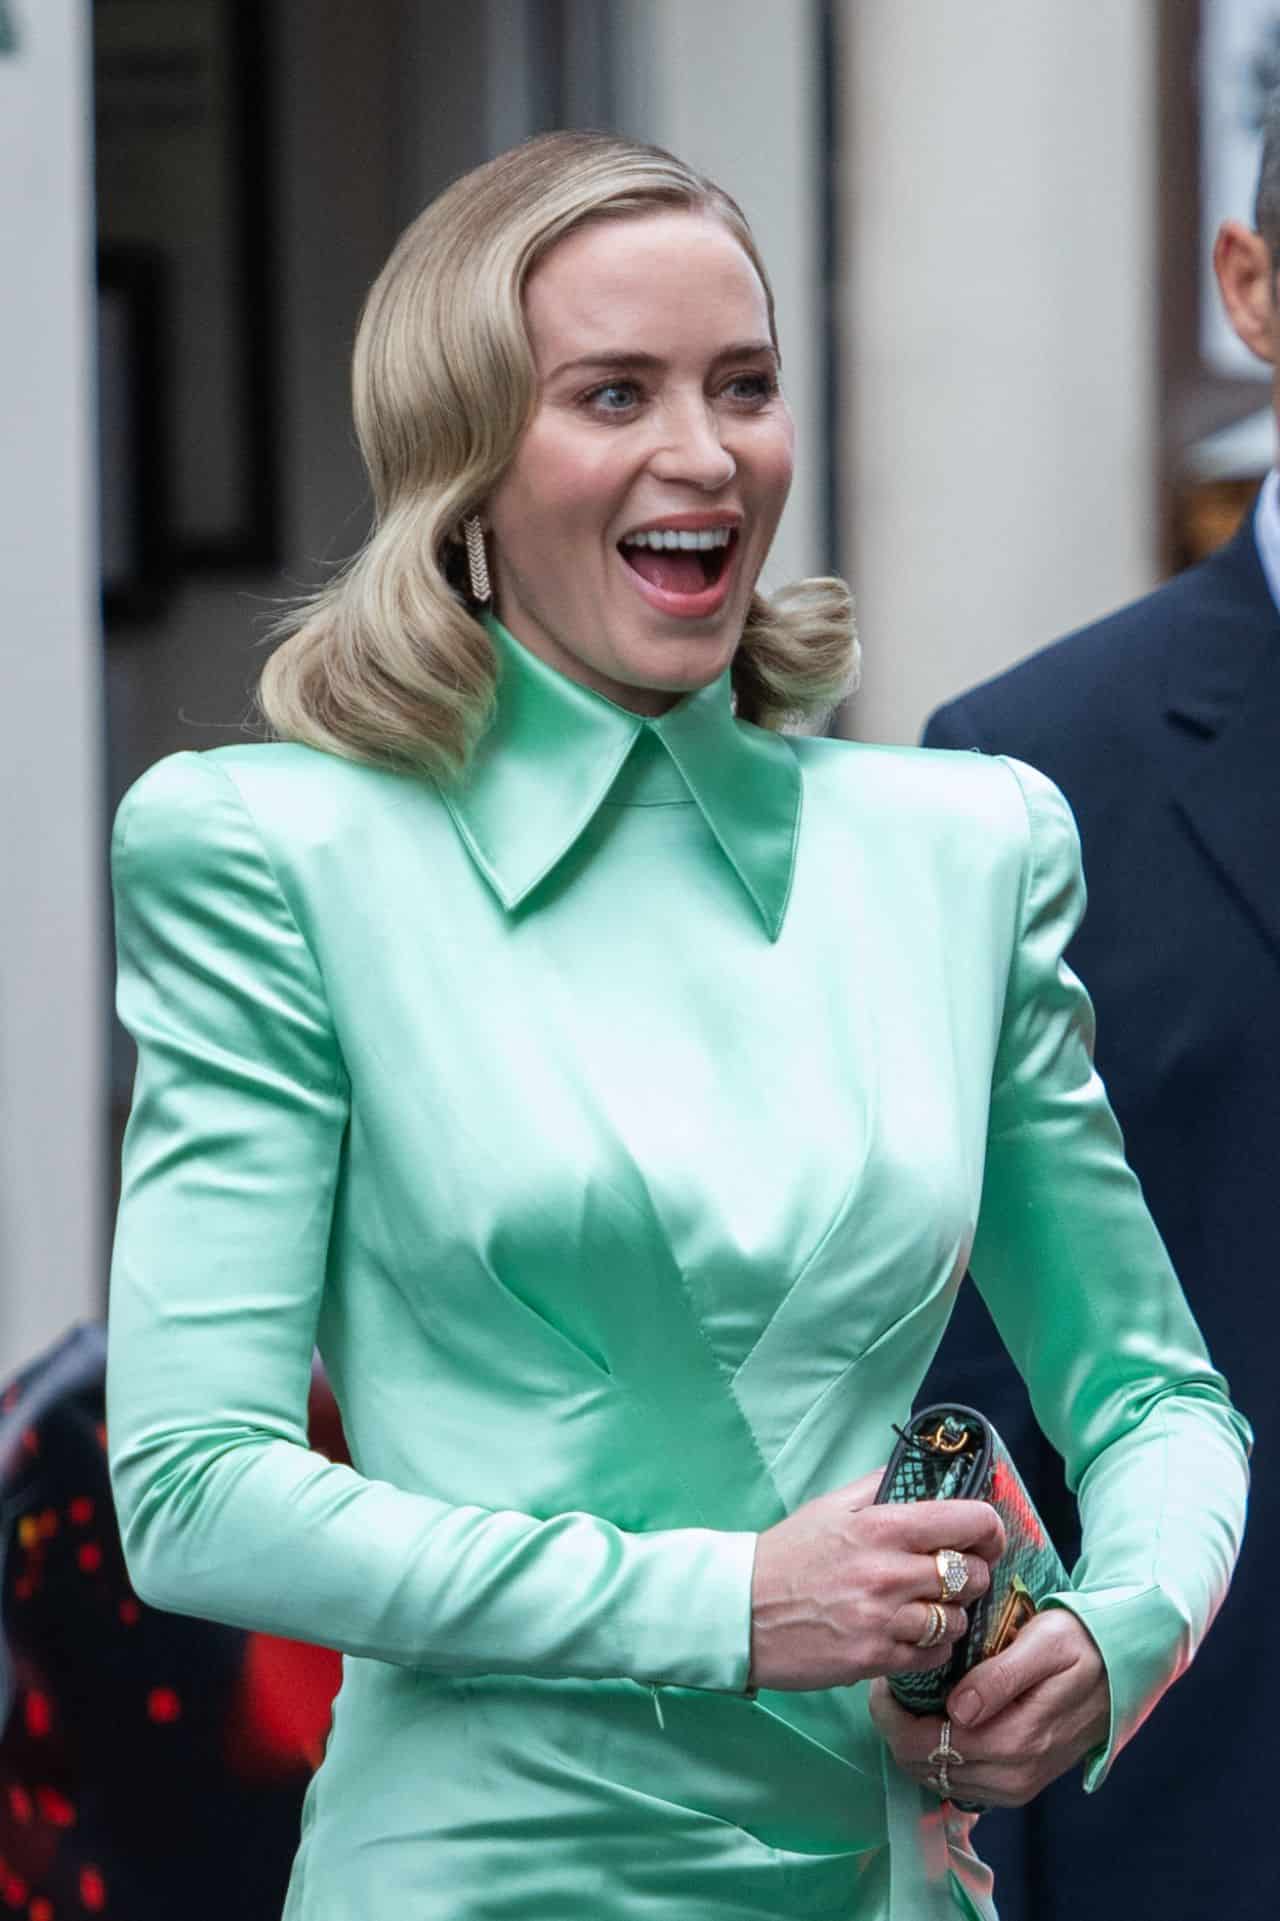 Emily Blunt Wears Green Satin Dress at the "Oppenheimer" Premiere in Paris